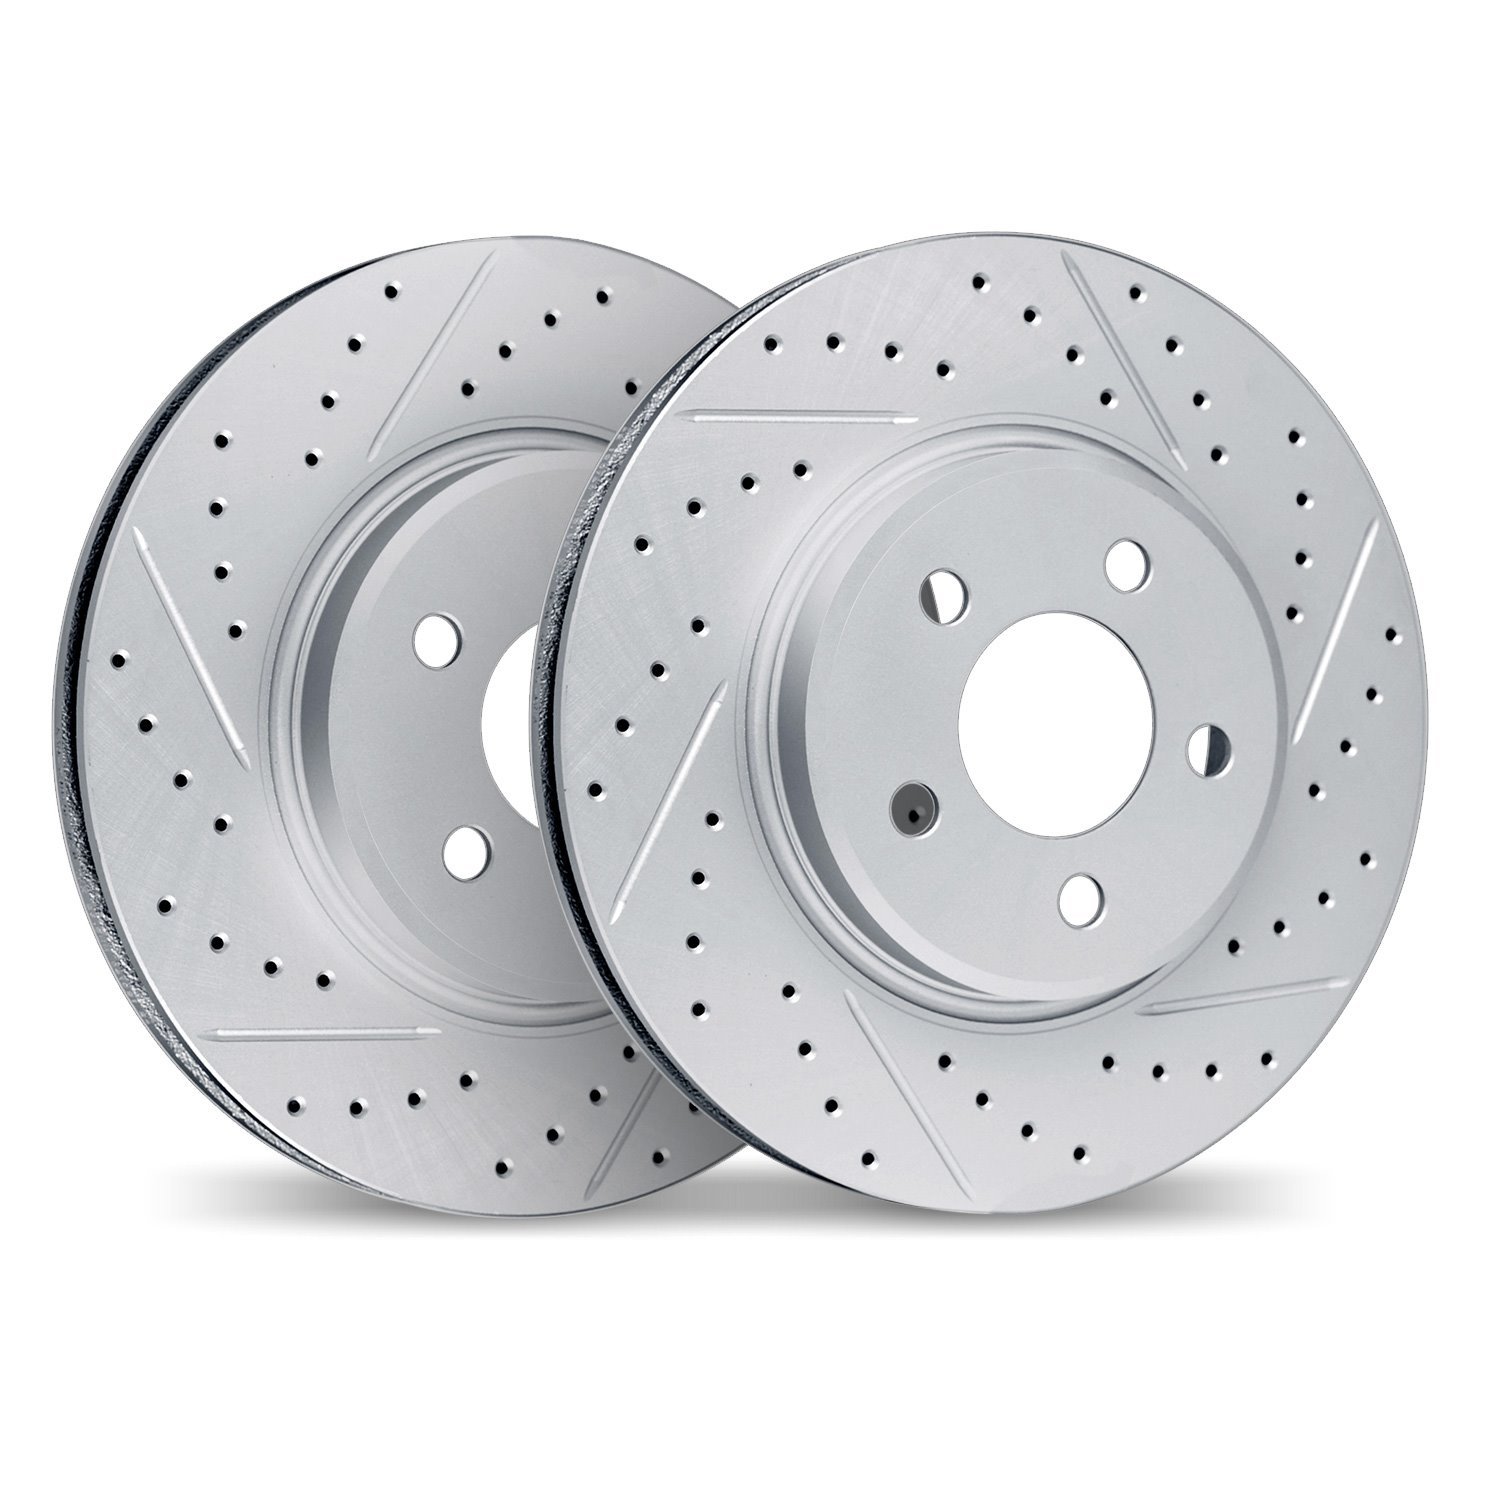 2002-54043 Geoperformance Drilled/Slotted Brake Rotors, 2001-2005 Ford/Lincoln/Mercury/Mazda, Position: Front